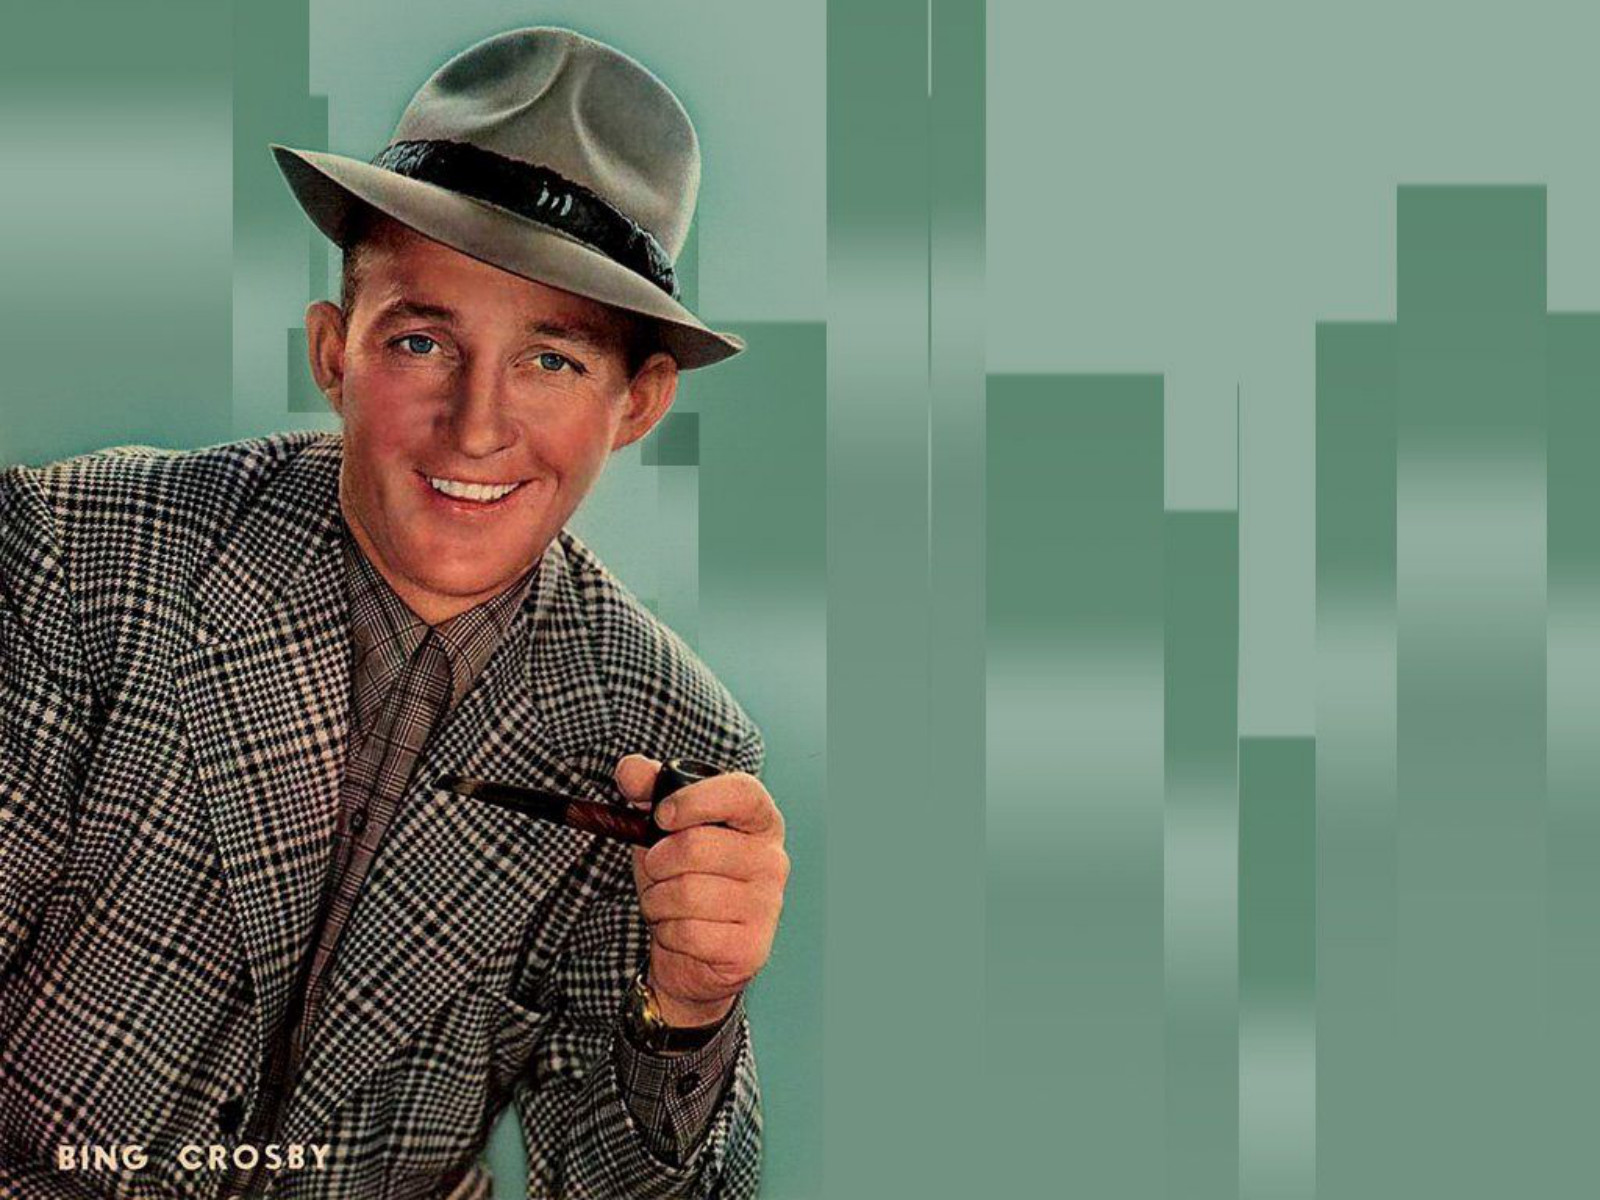 Free download Bing Crosby wallpaper by Meredy [1600x1200] for your